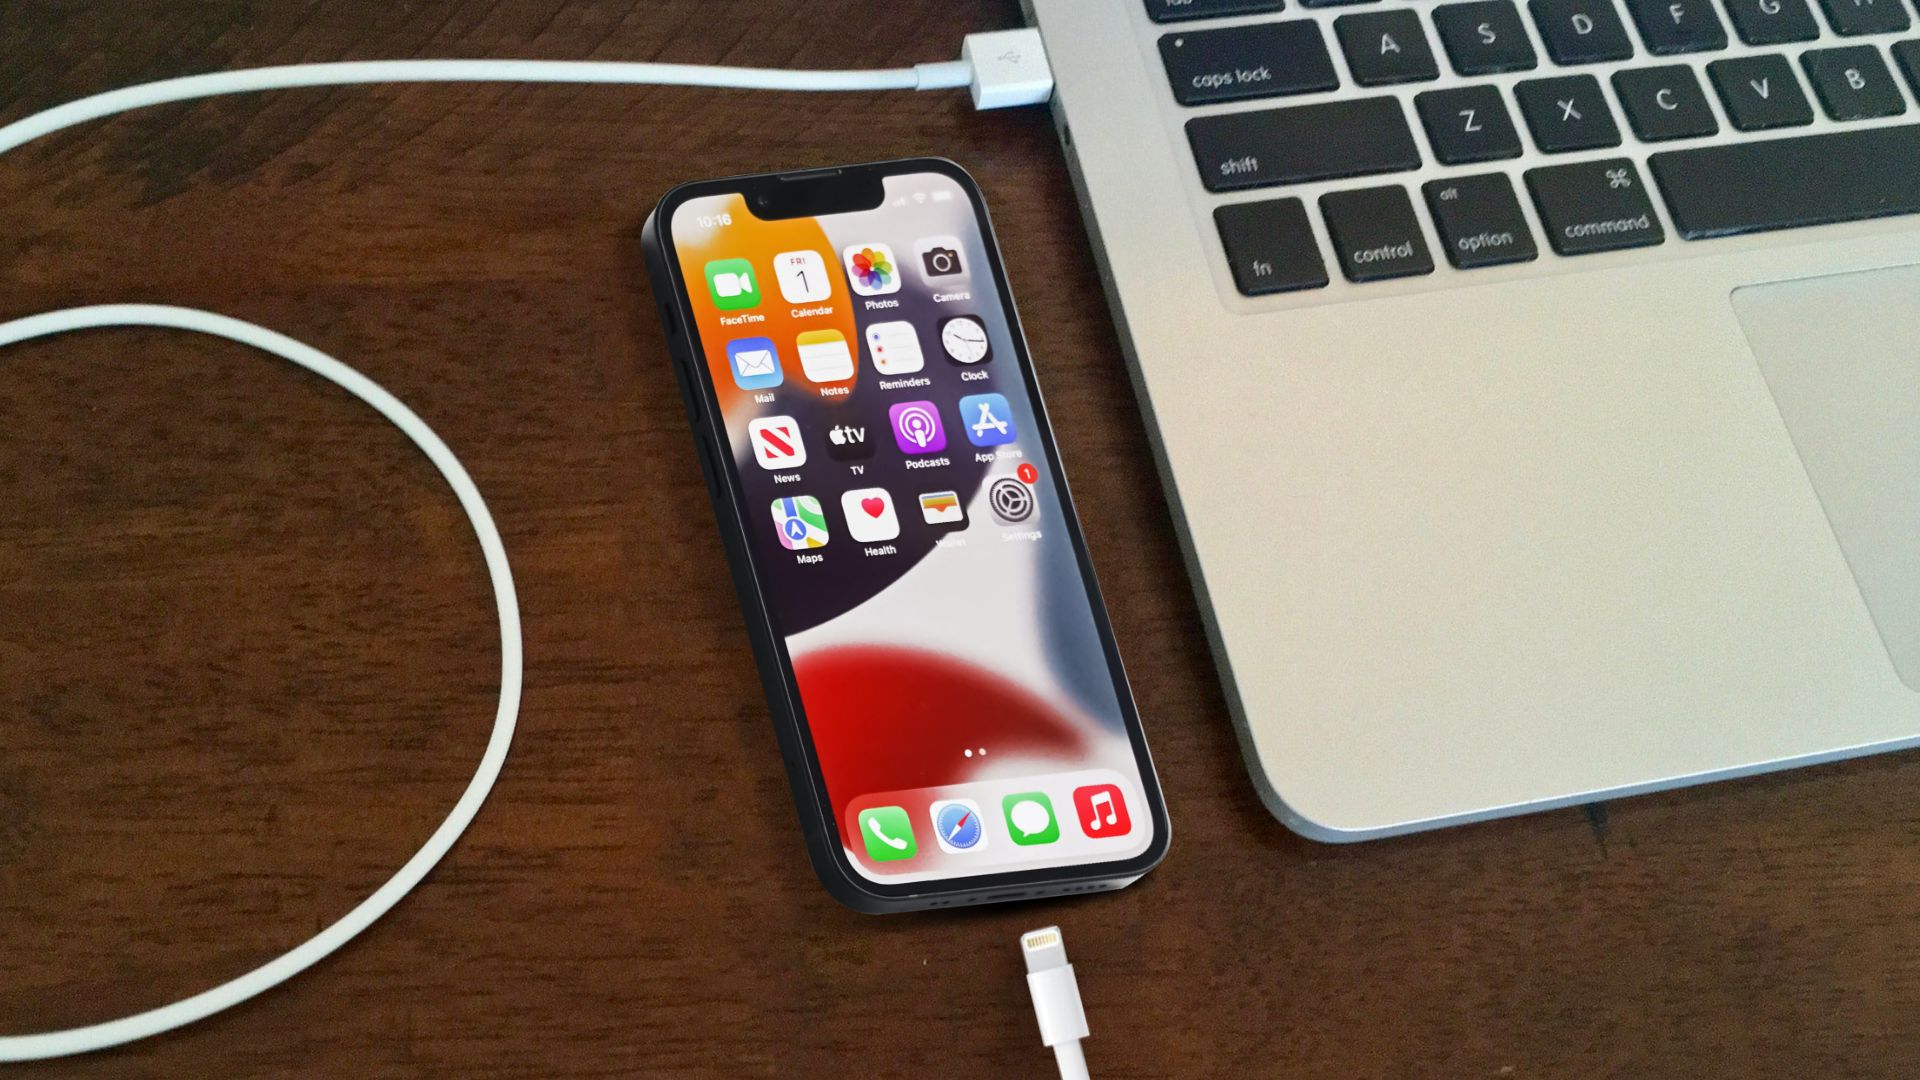 Disconnect USB cable between iPhone from Mac